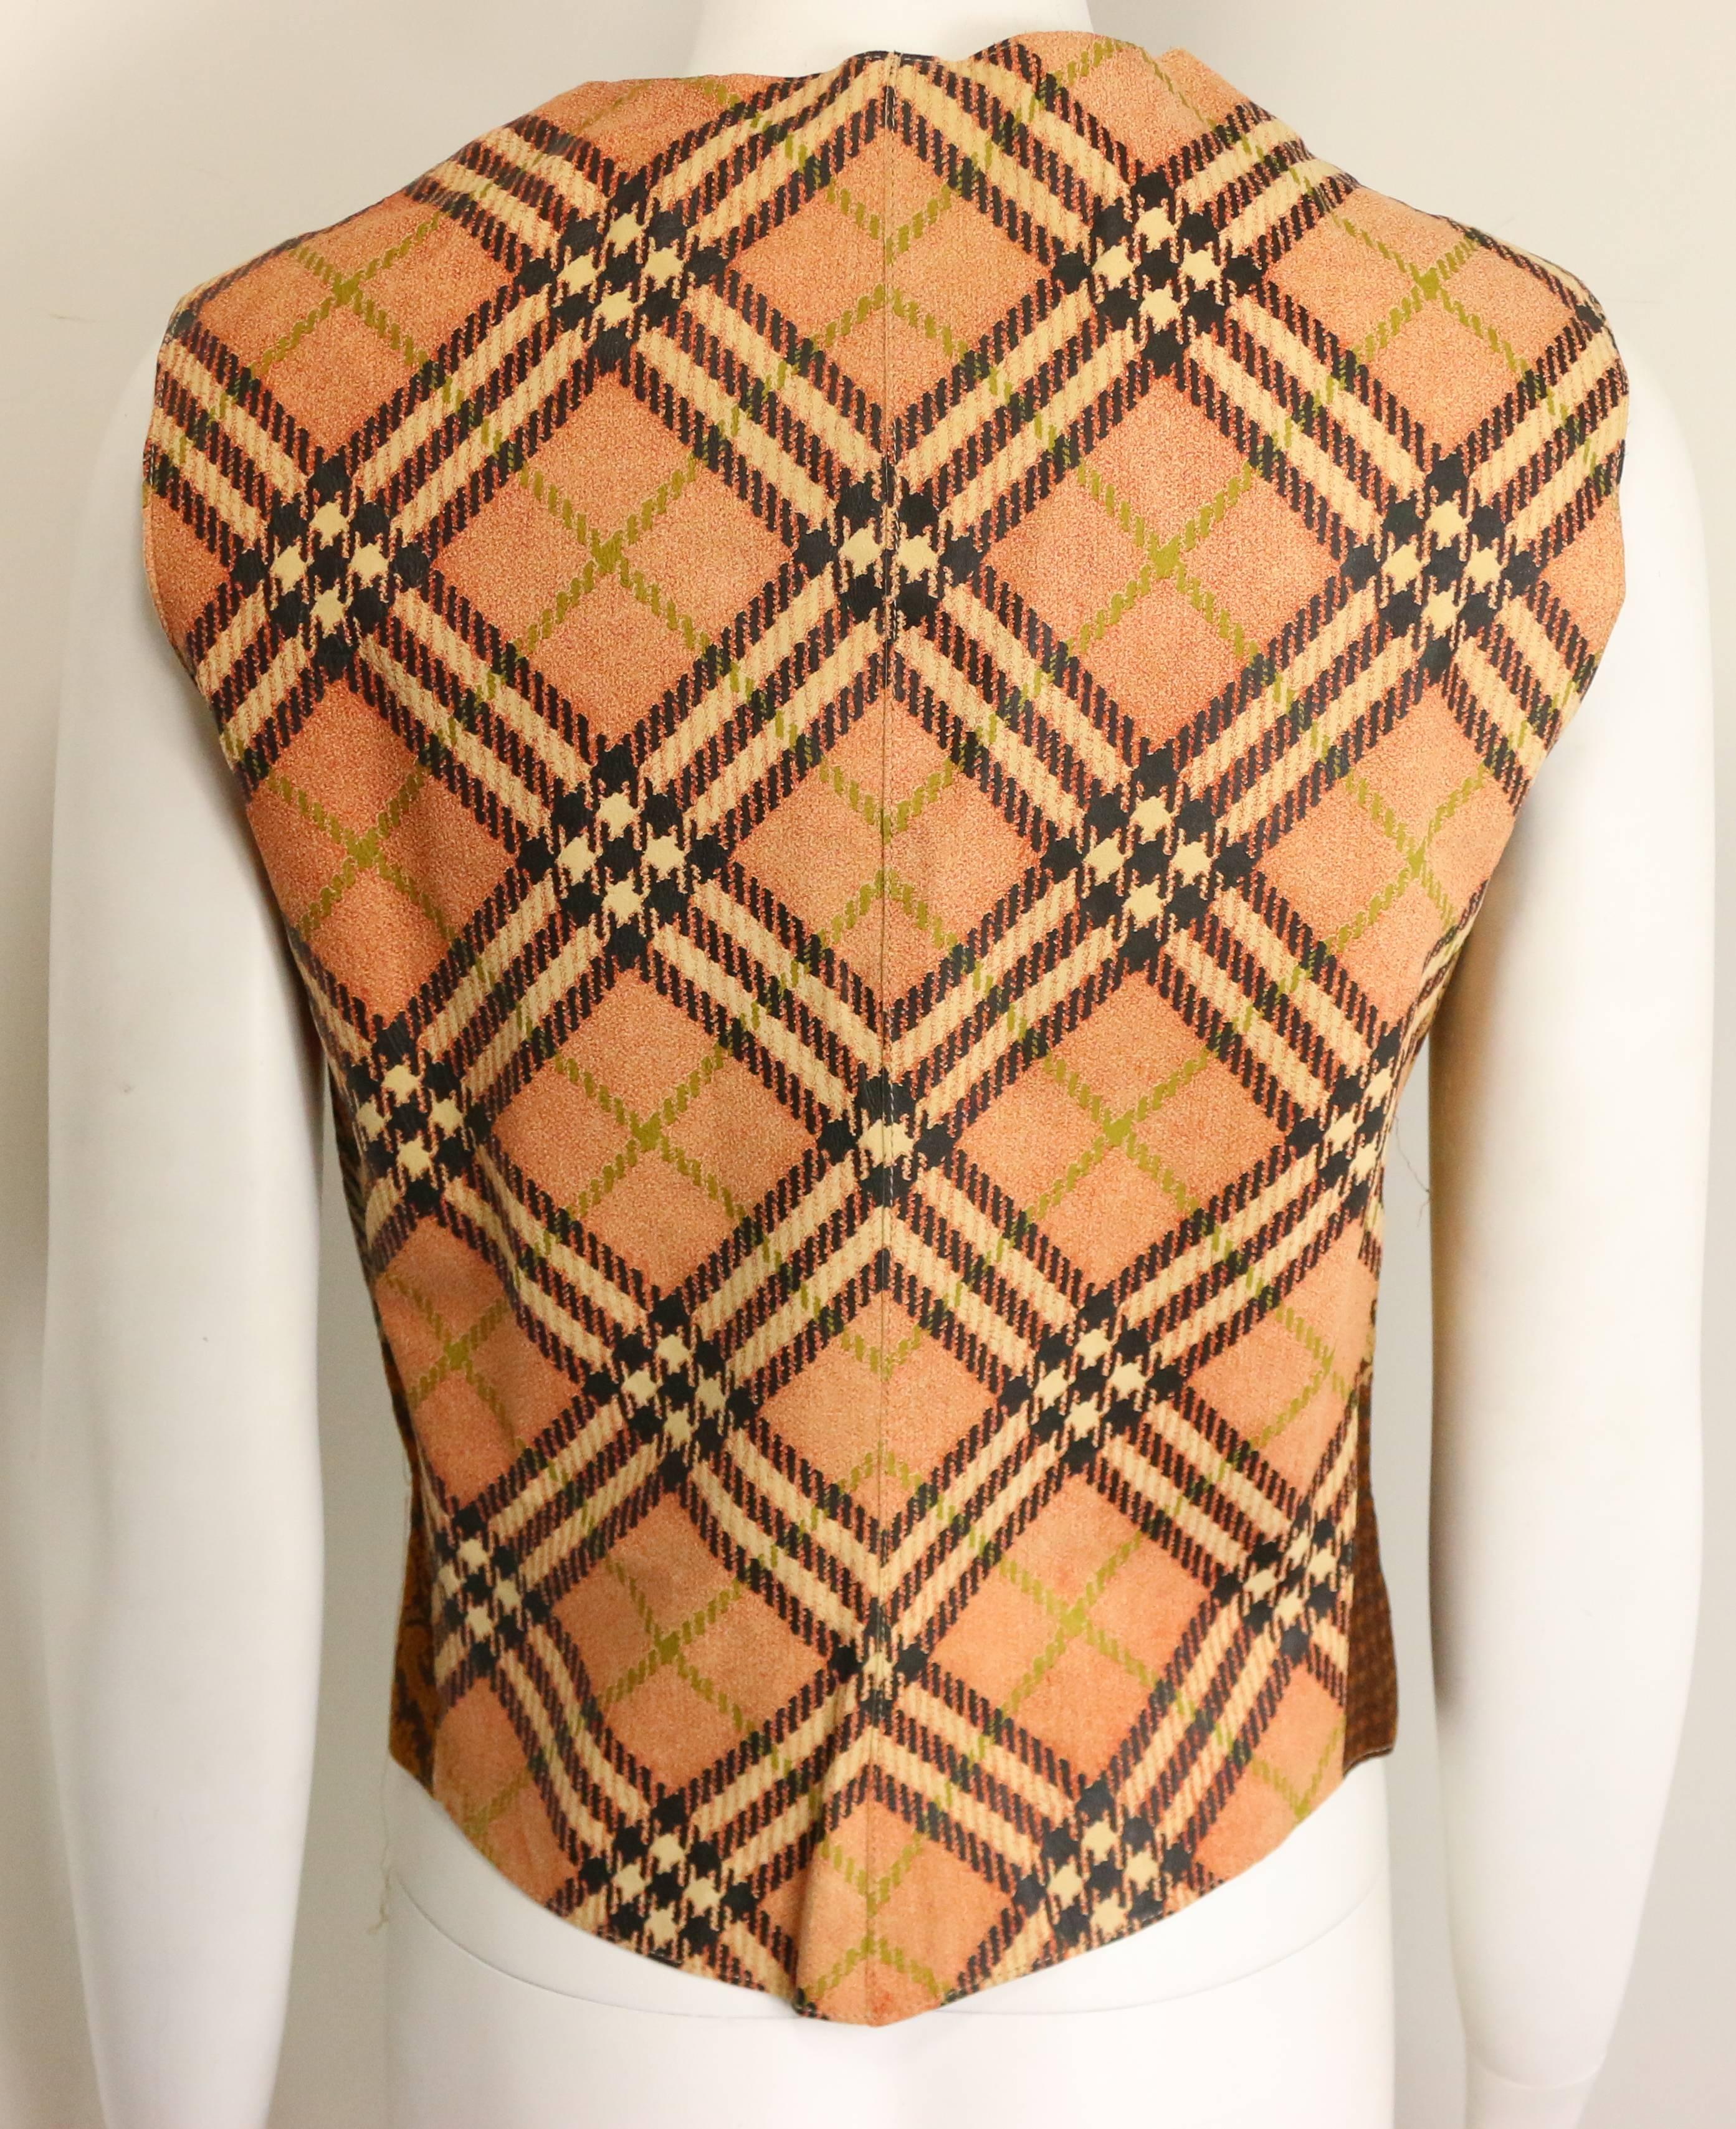 - Vintage 90s Roberto Cavalli leather patchwork with different patterns(houndstooth, plaid, check, tartan, etc...) vest. 

- Featuring four front brown buttons closing. 

- Made in Italy. 

- Size M 

- 100% Leather. 
